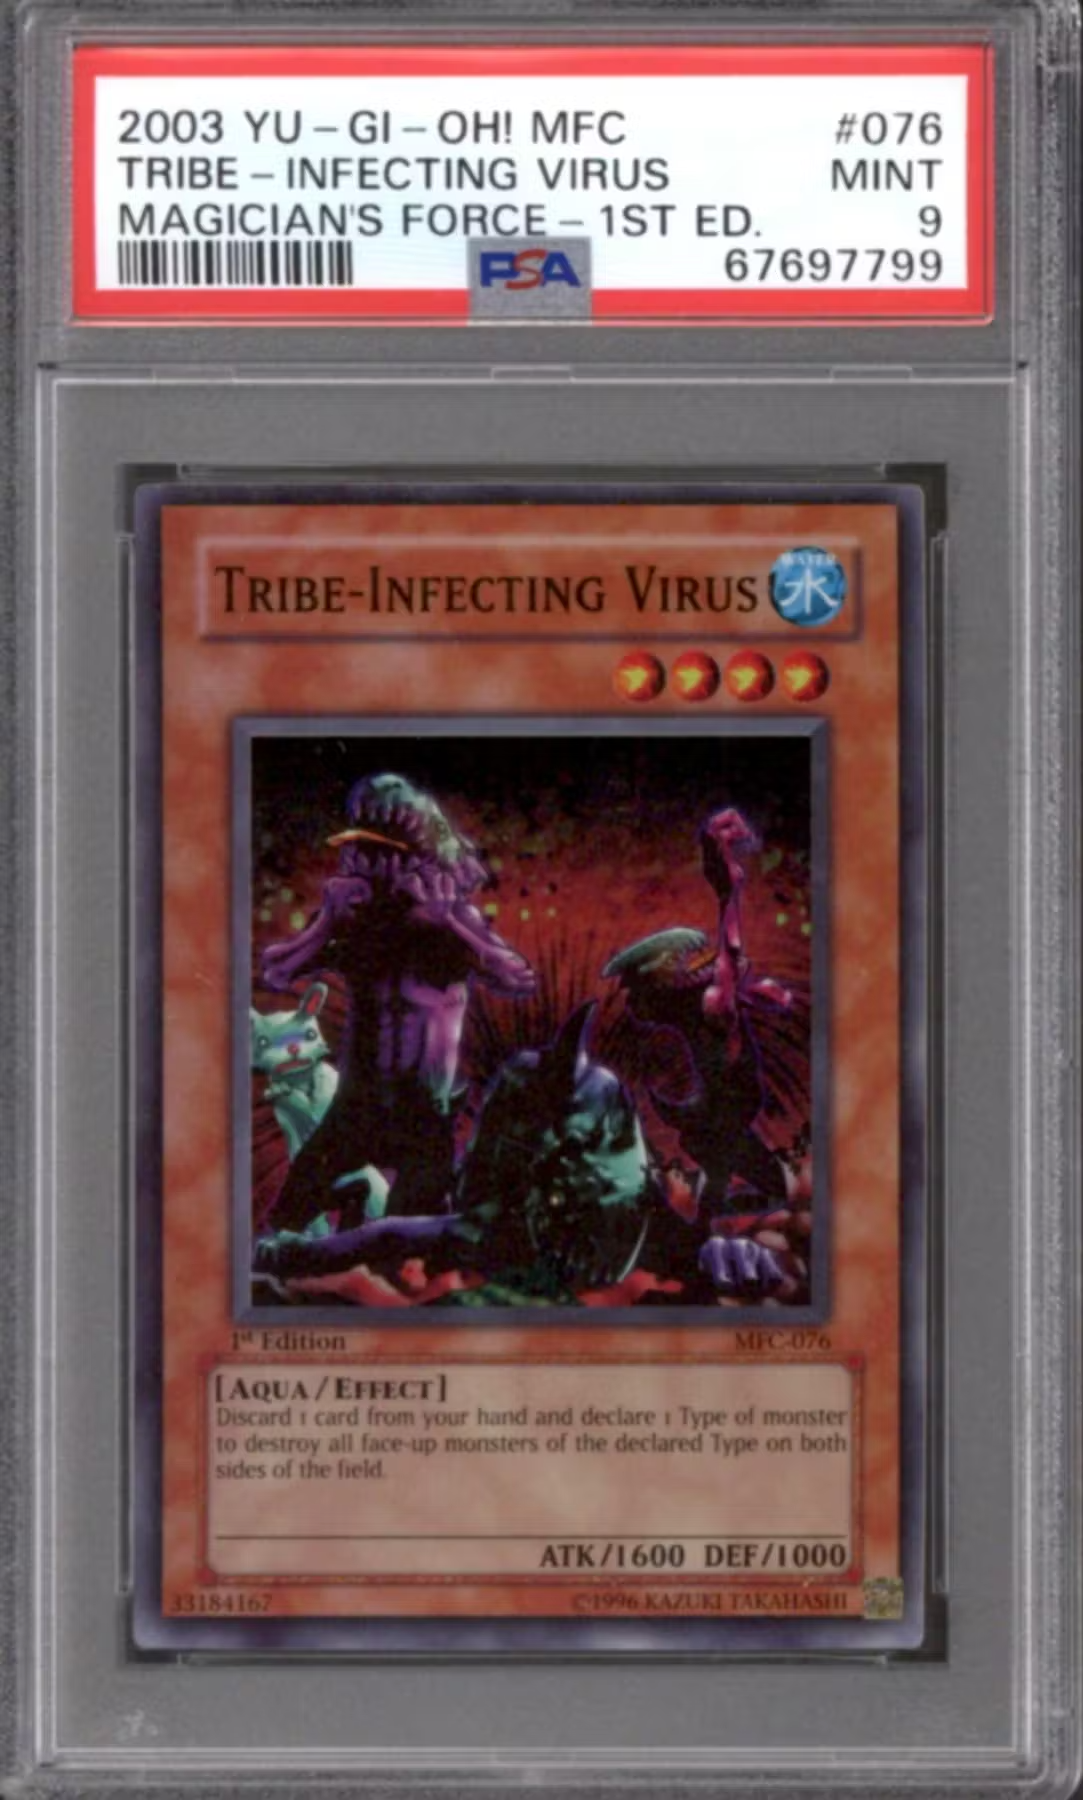 Yu-Gi-Oh Magician's Force 1st Edition Tribe-Infecting Virus MFC-076 PSA 9